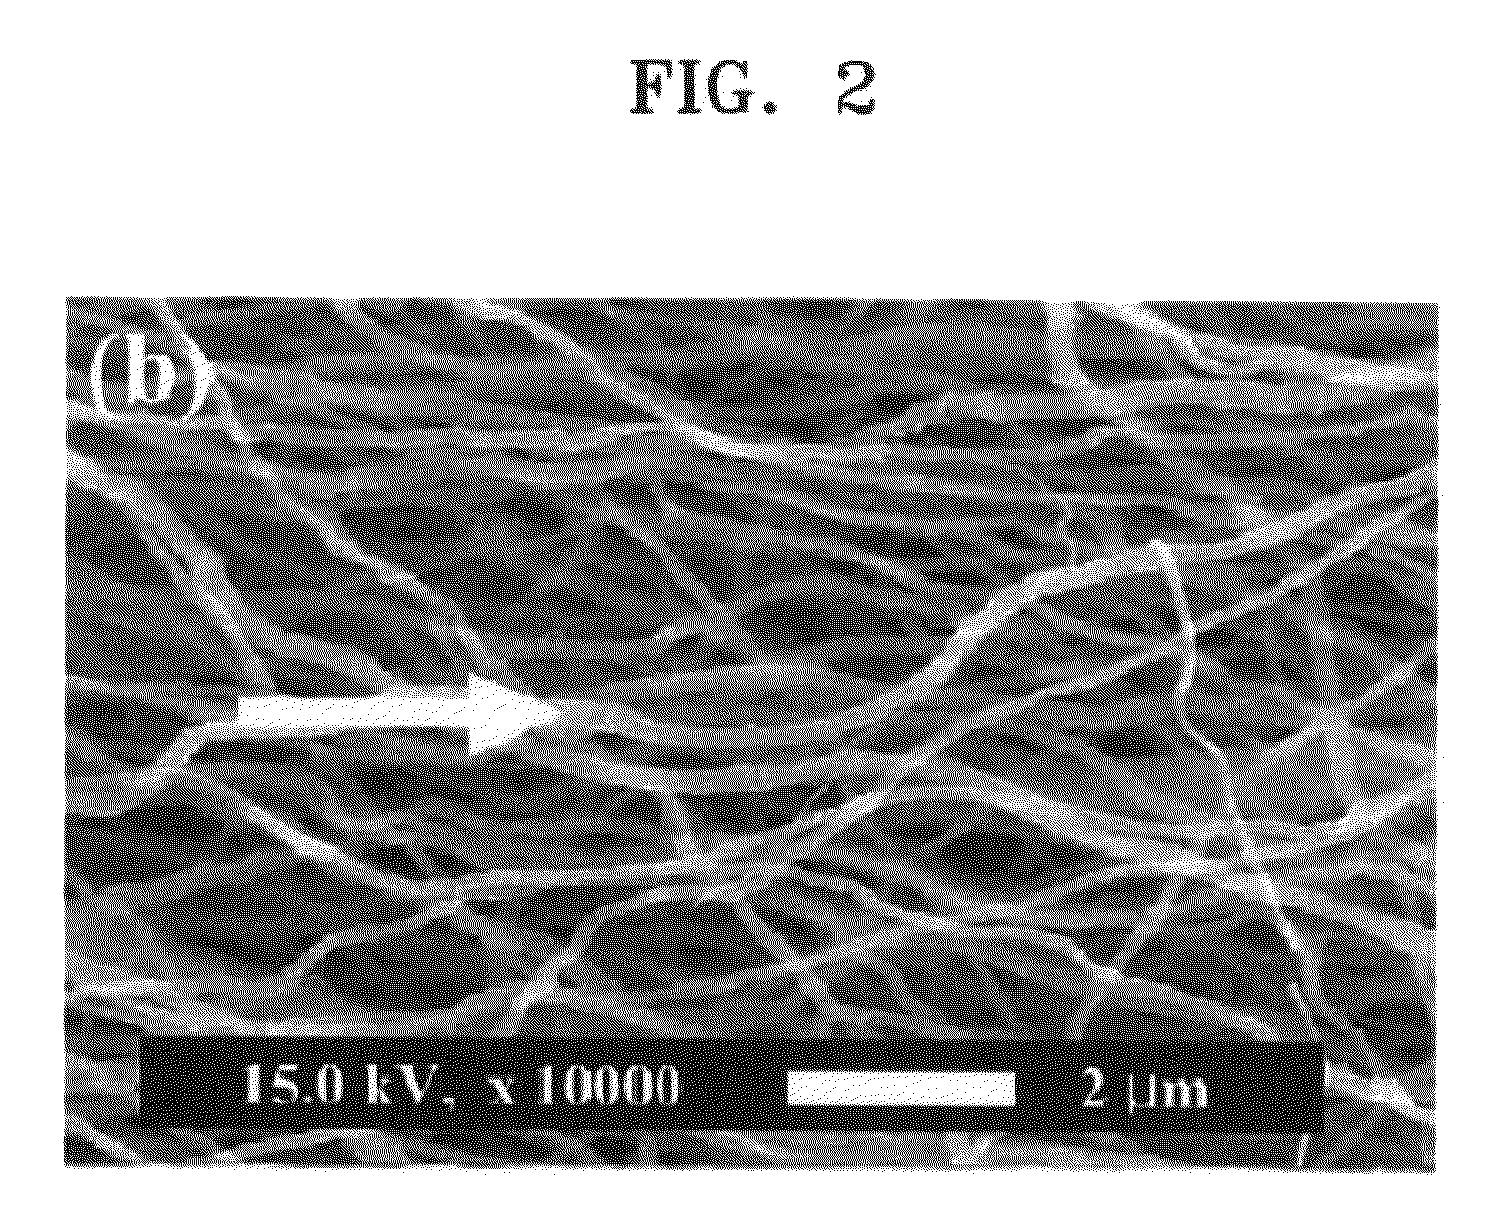 Nanocomposite for fuel cell, method of preparing the nanocomposite, and fuel cell including the nanocomposite